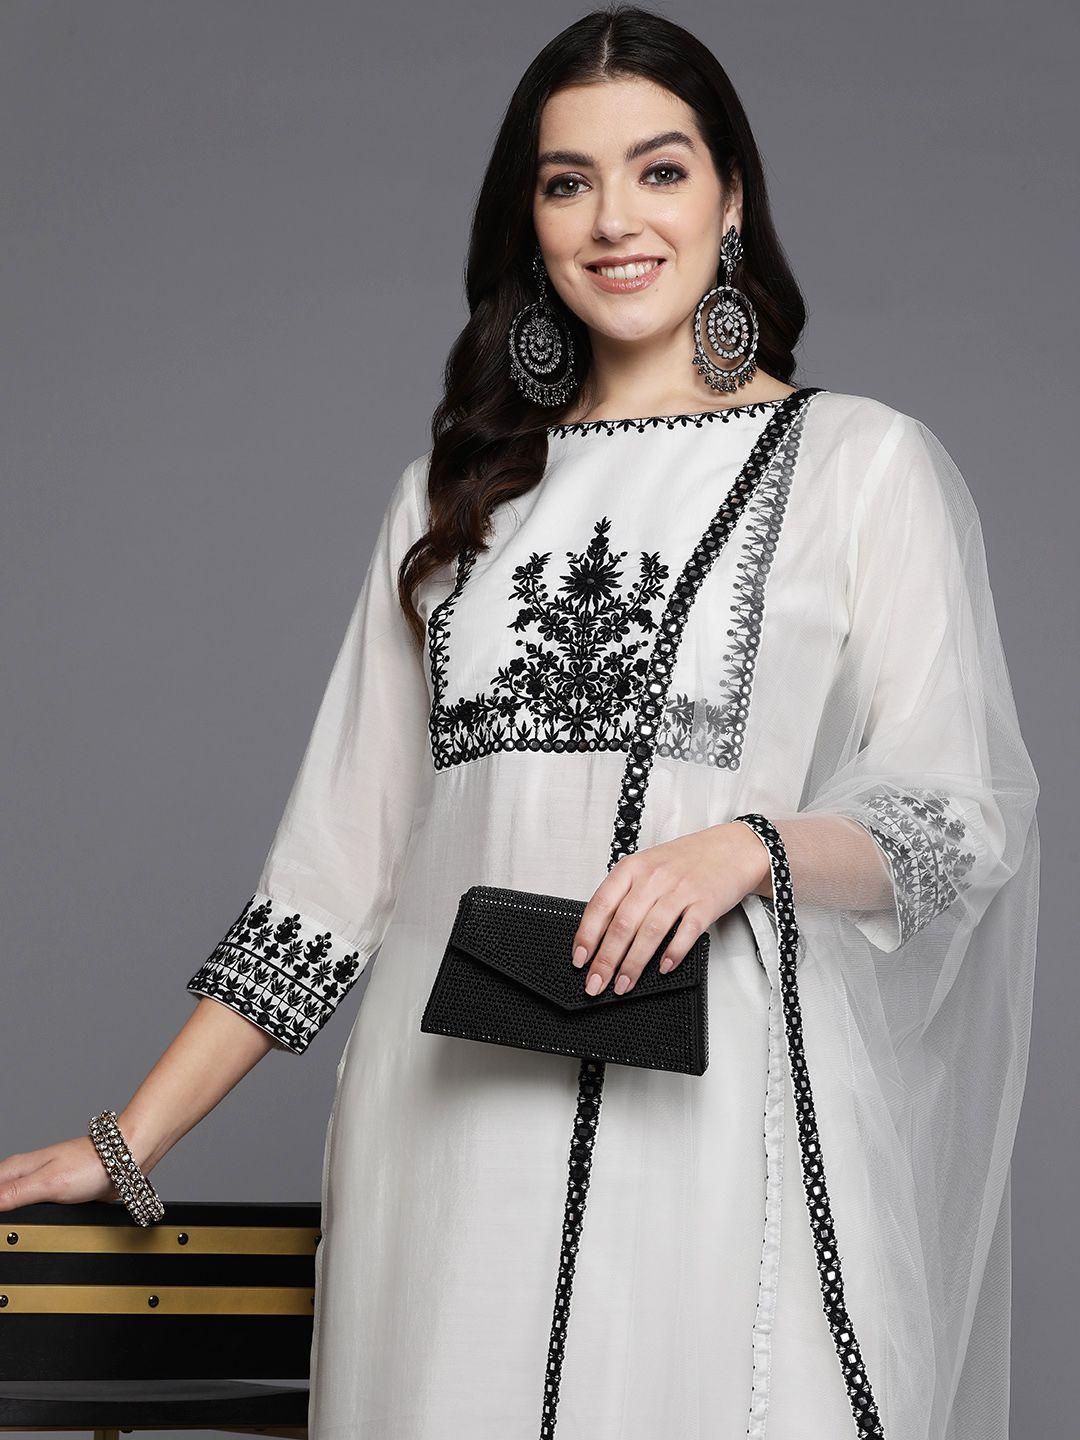 indo era women floral embroidered regular mirror work kurta with trousers & with dupatta